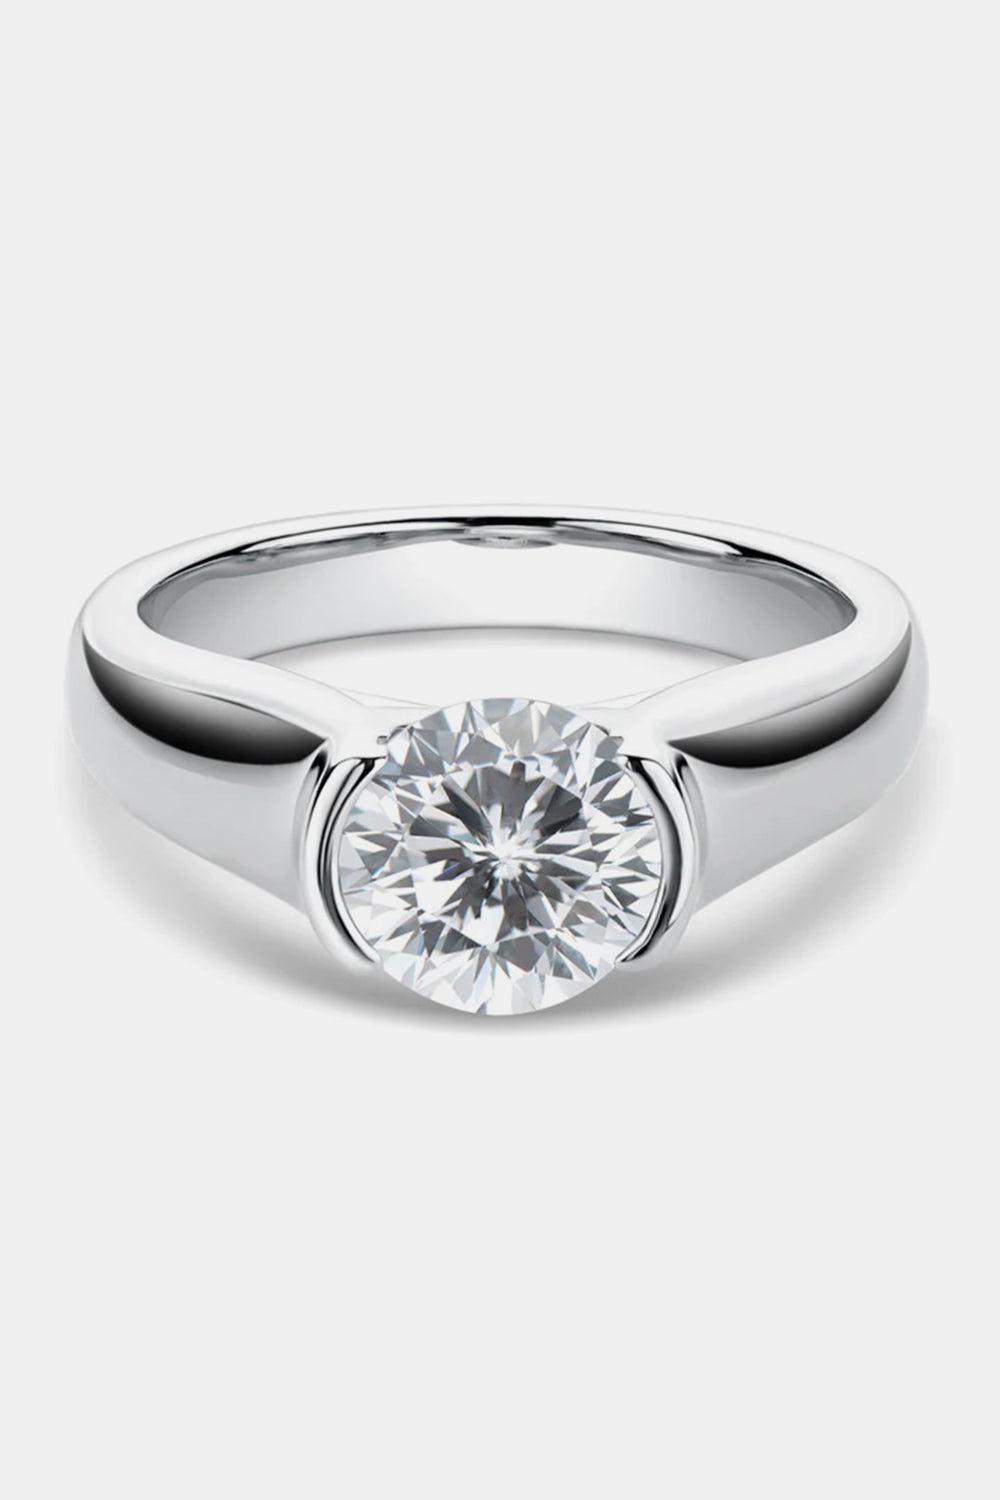 a white gold engagement ring with a round brilliant diamond